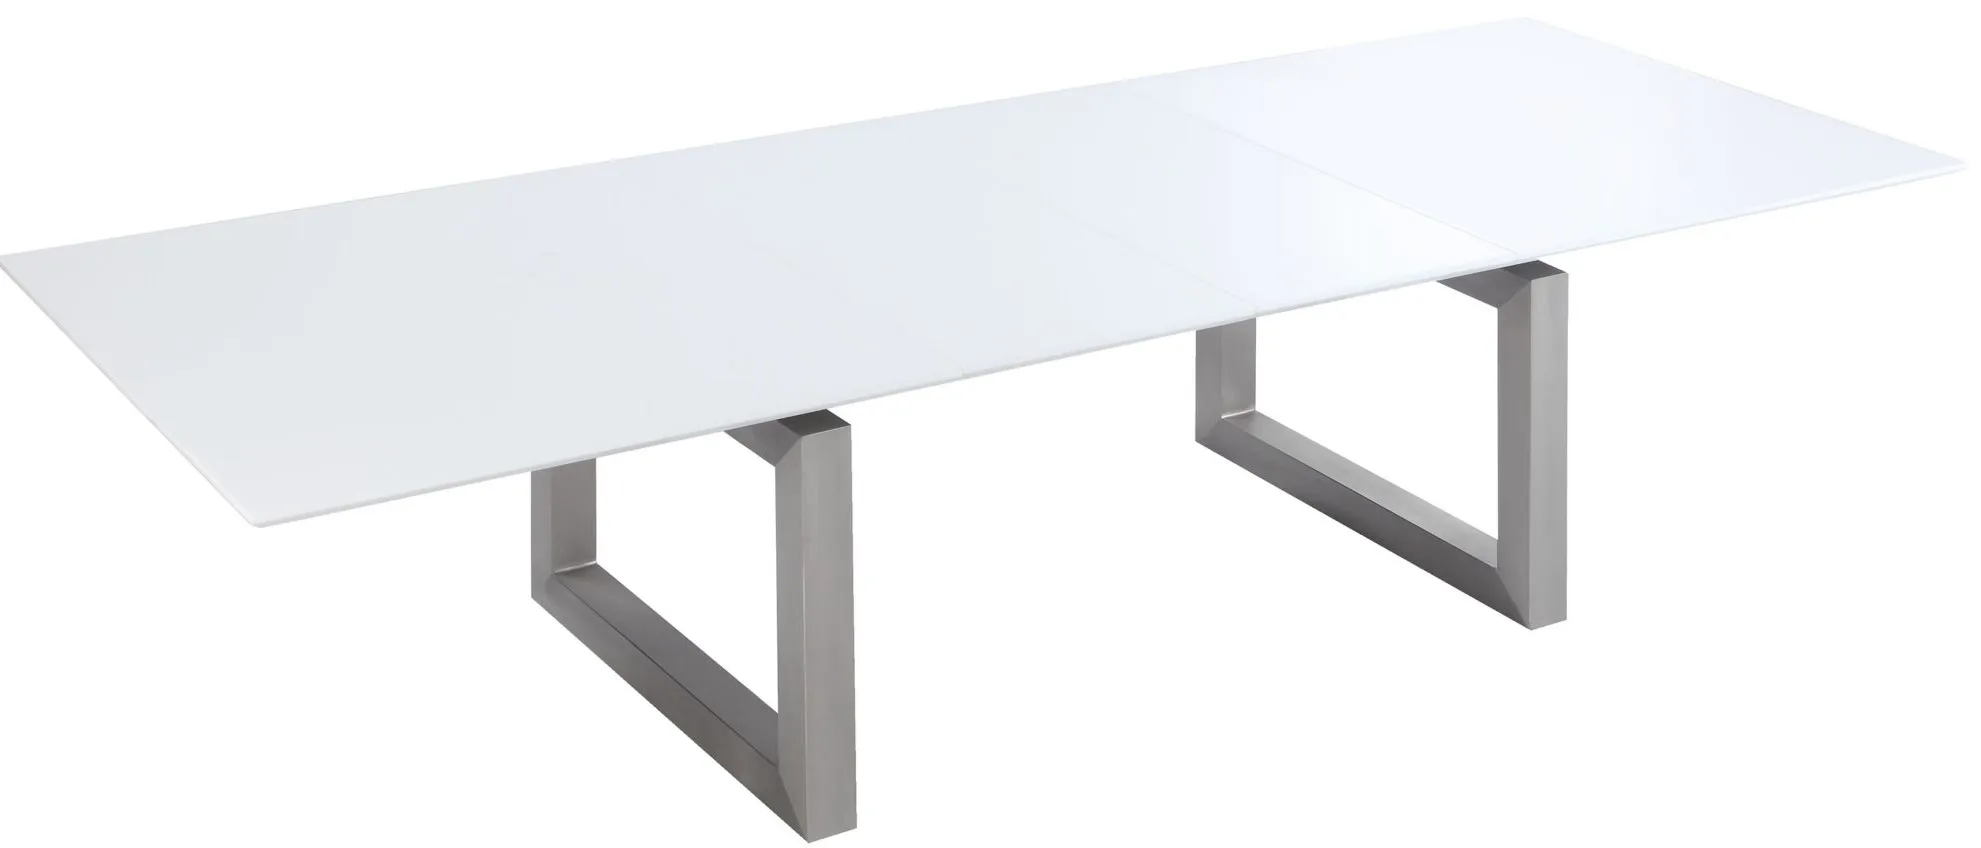 Ebony Dining Table in White and Silver by Chintaly Imports